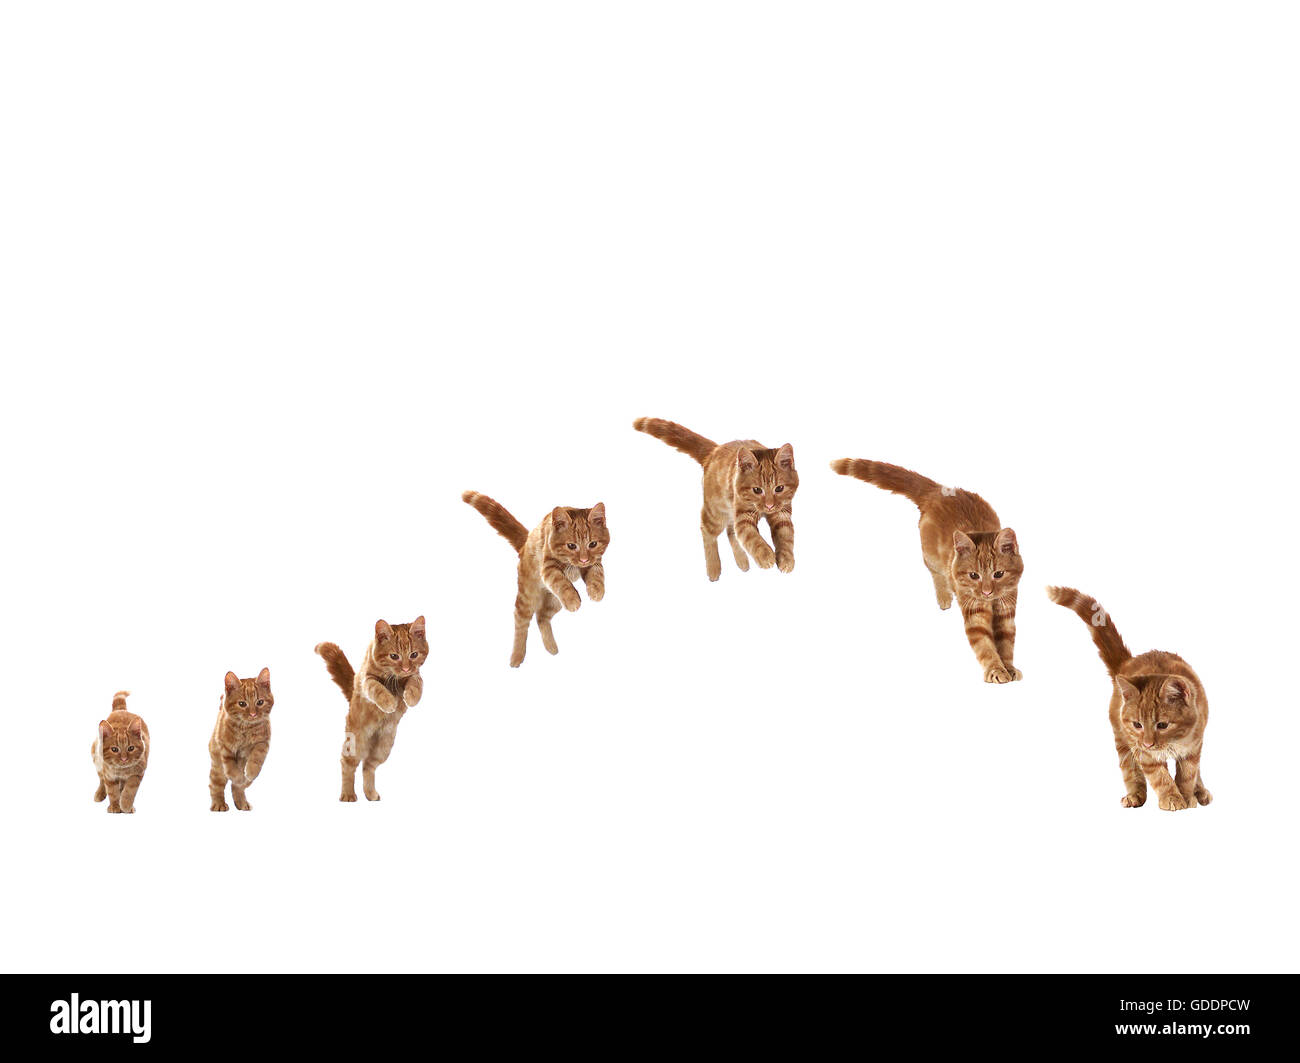 Red Tabby Domestic Cat, Kitten against White Background, Leaping Sequence Stock Photo